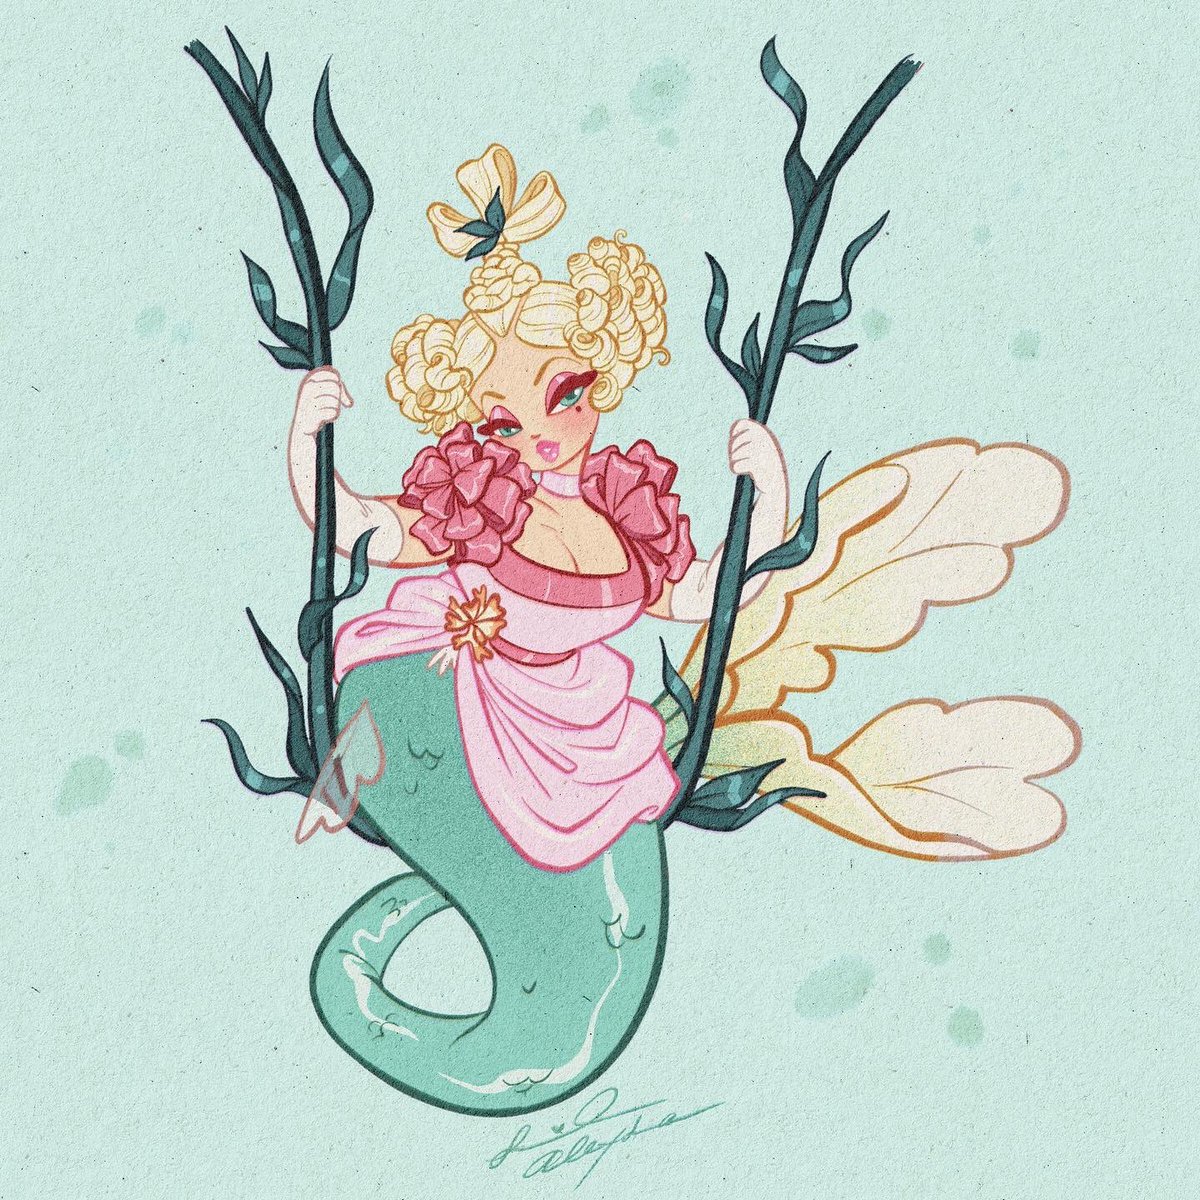 Doin some #GildedGlamour inspired mermaids for #mermay2022 ! Also if you haven’t already, subscribe to me on YouTube! I’m trying to get enough watch time to get monetized! YouTube.com/savannahalexan…